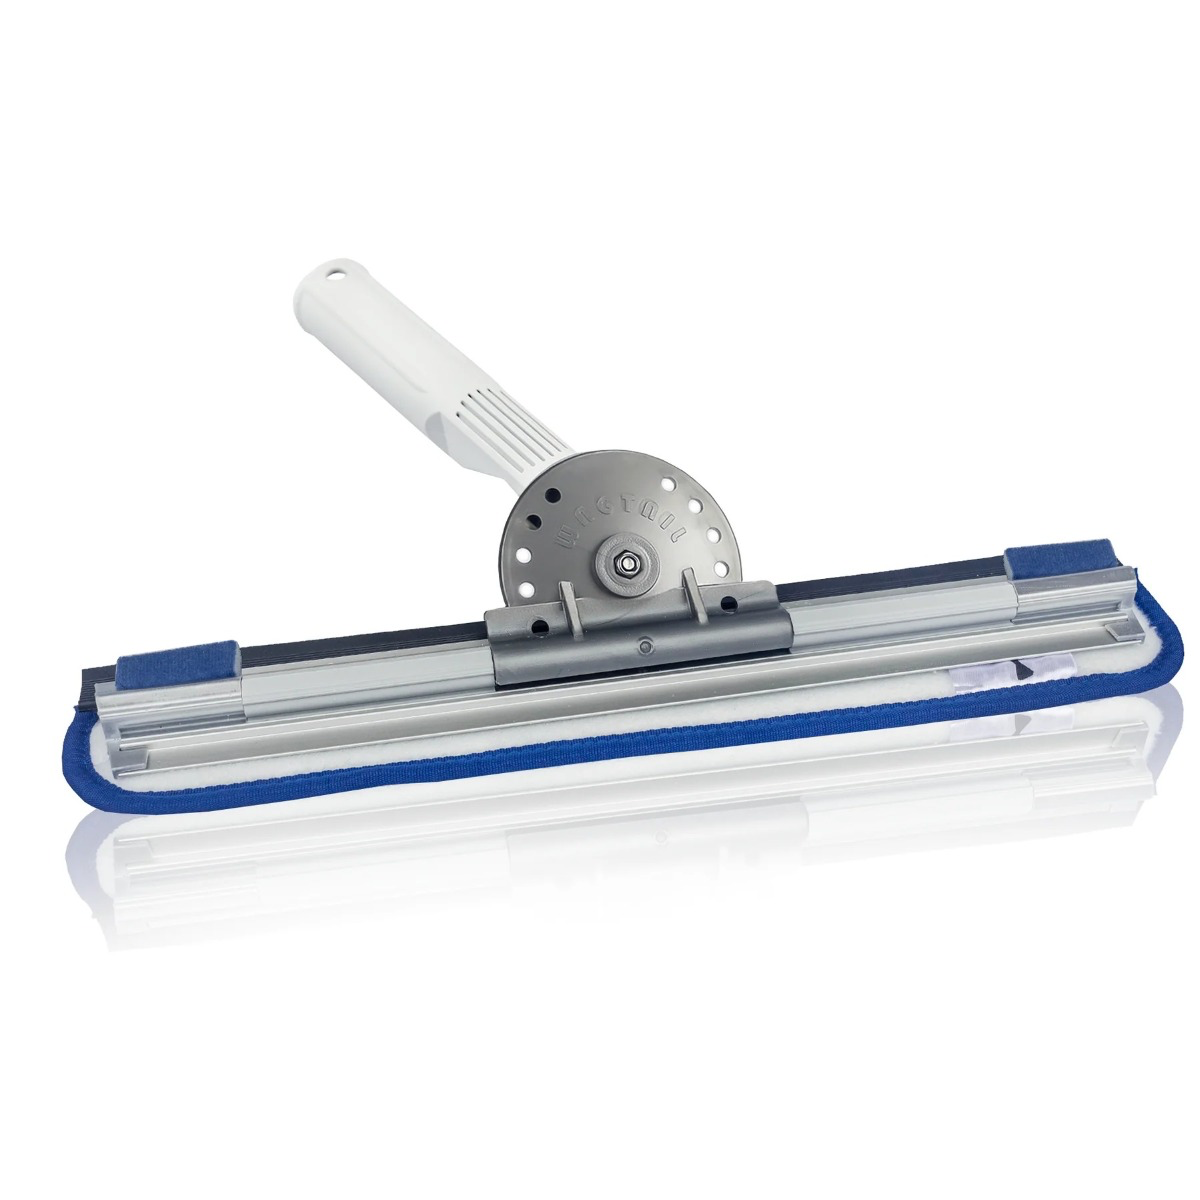 Wagtail High Flyer Pivoting Squeegee Questions & Answers